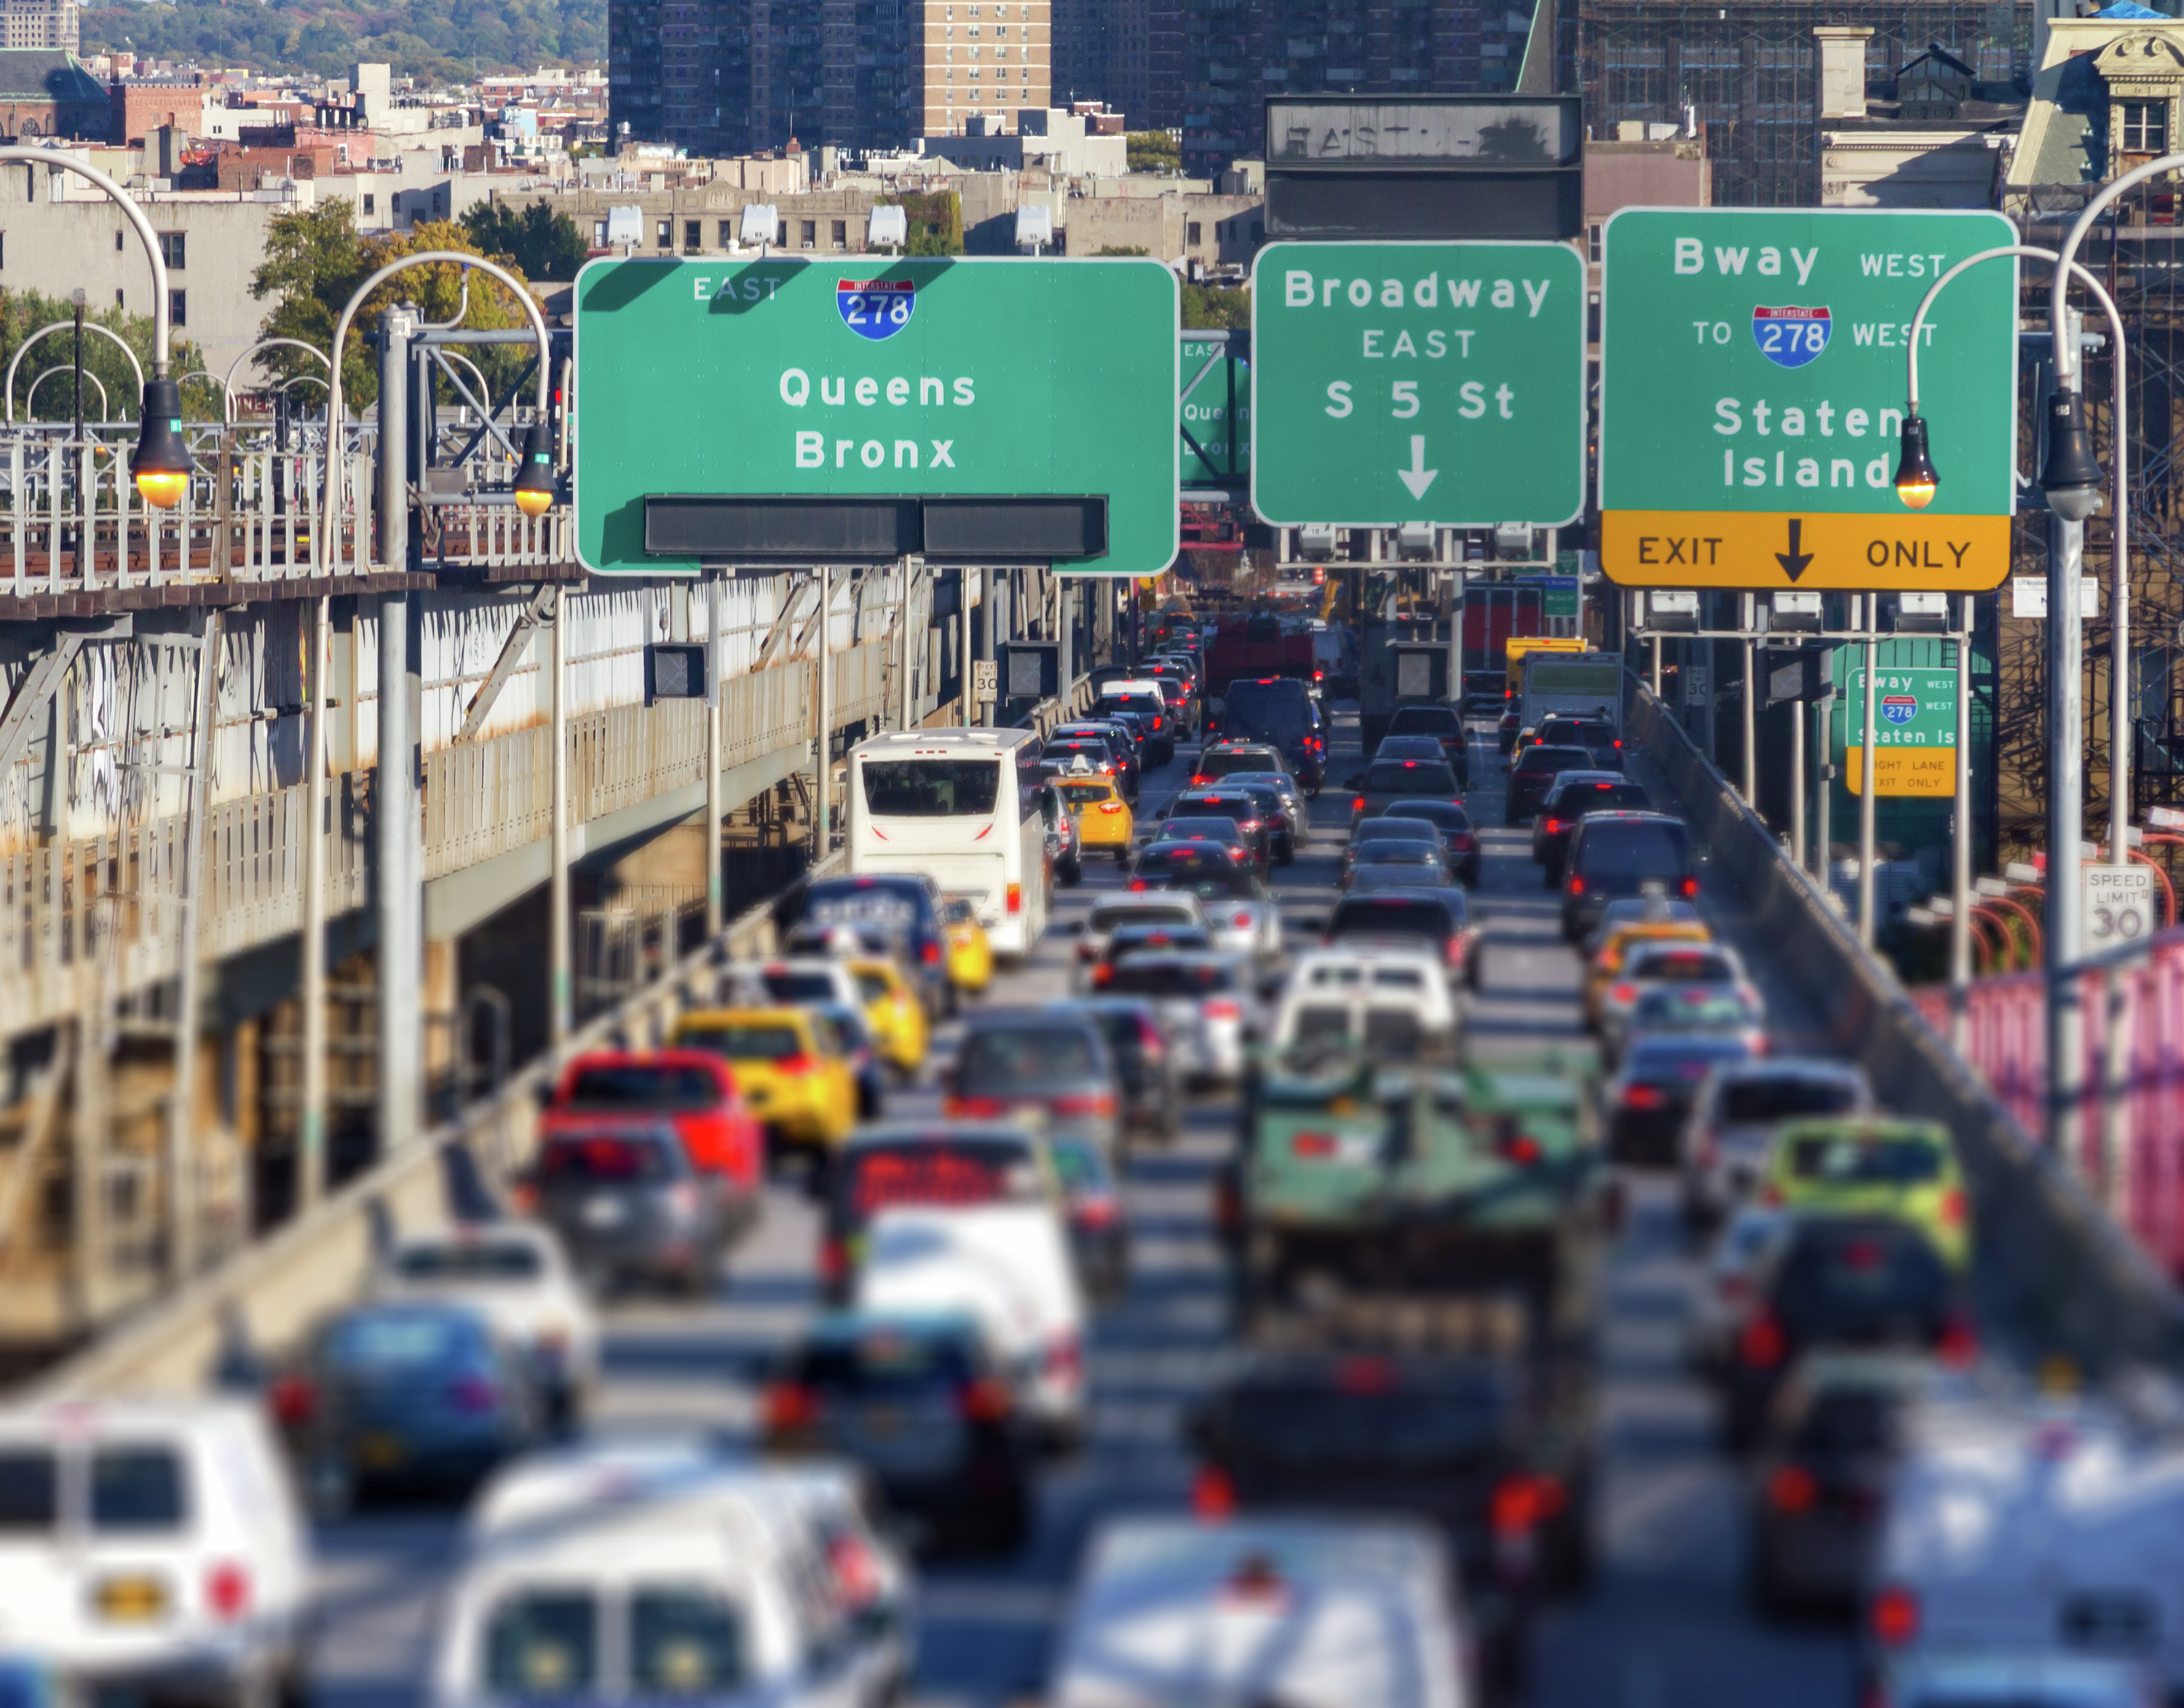 ON THE RECORD: Nearly 3 million New Yorkers expected to hit the road this Memorial Day weekend